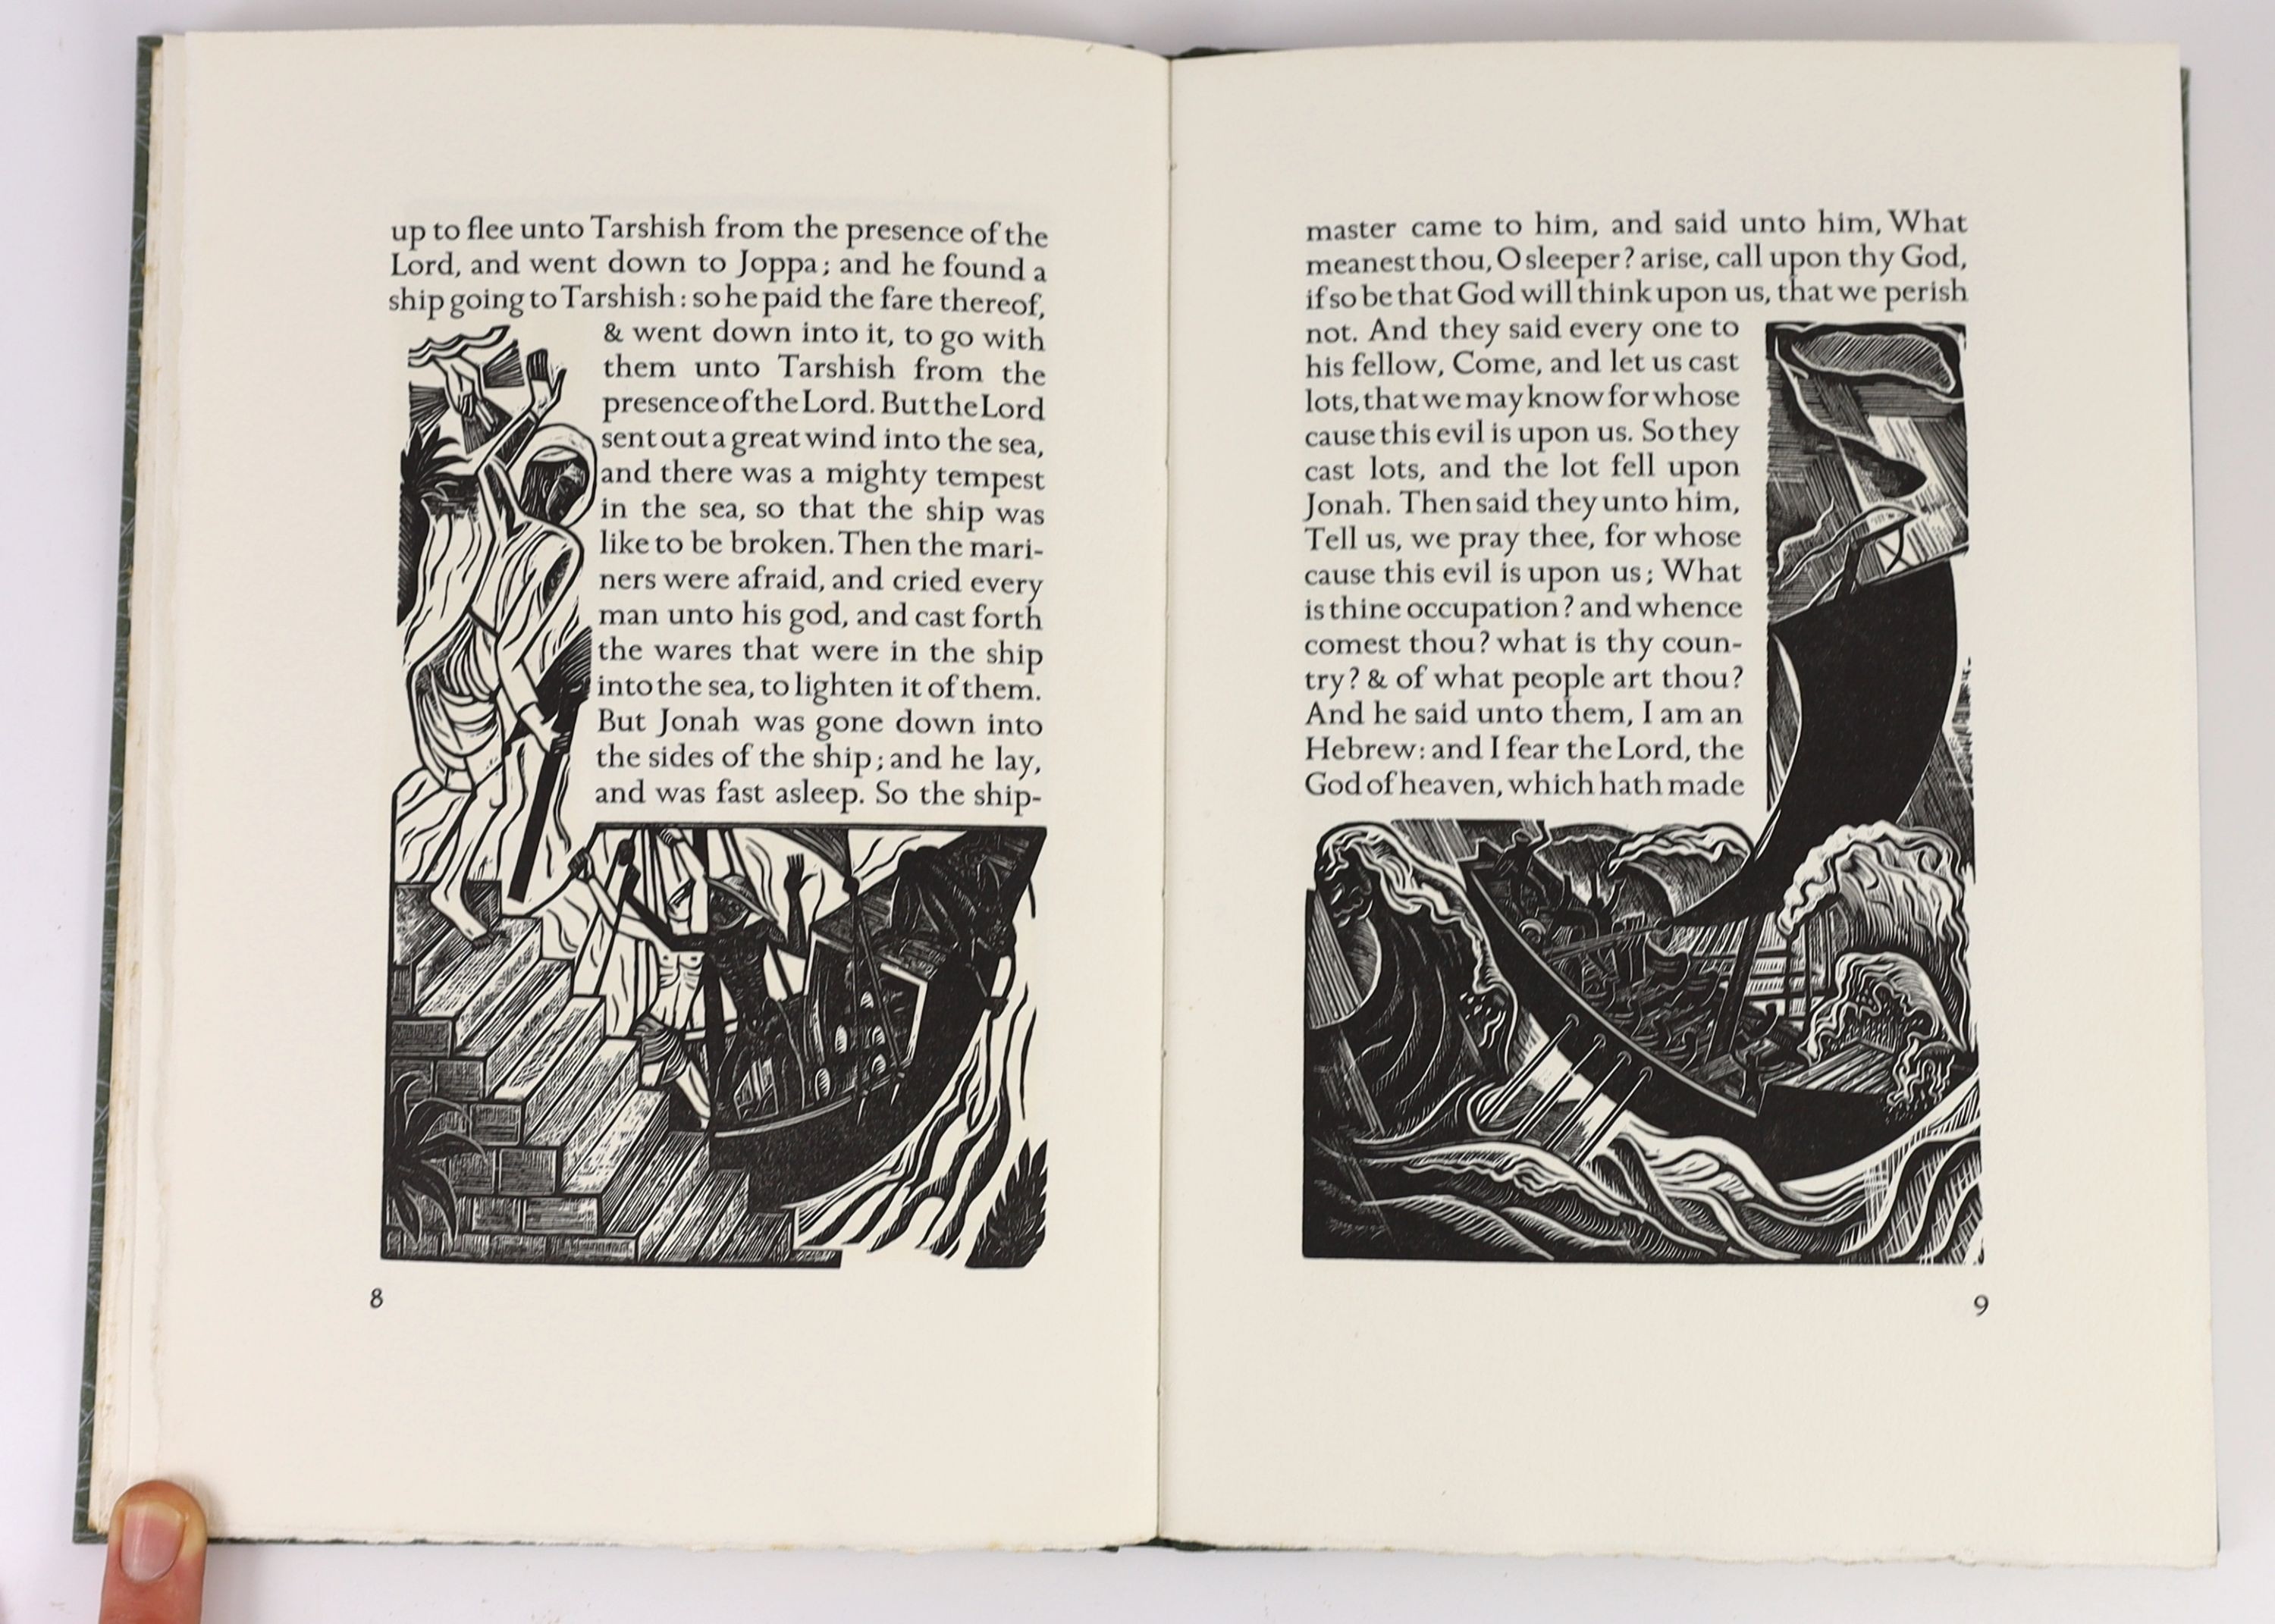 Jones, David [illustrator] - The Book of Jonah… limited edition, No. 41 of 300 printed on J. Green mould-made paper. Numerous wood-cut engravings in the text by David Jones. Quarter cloth and illustrated paper with gilt